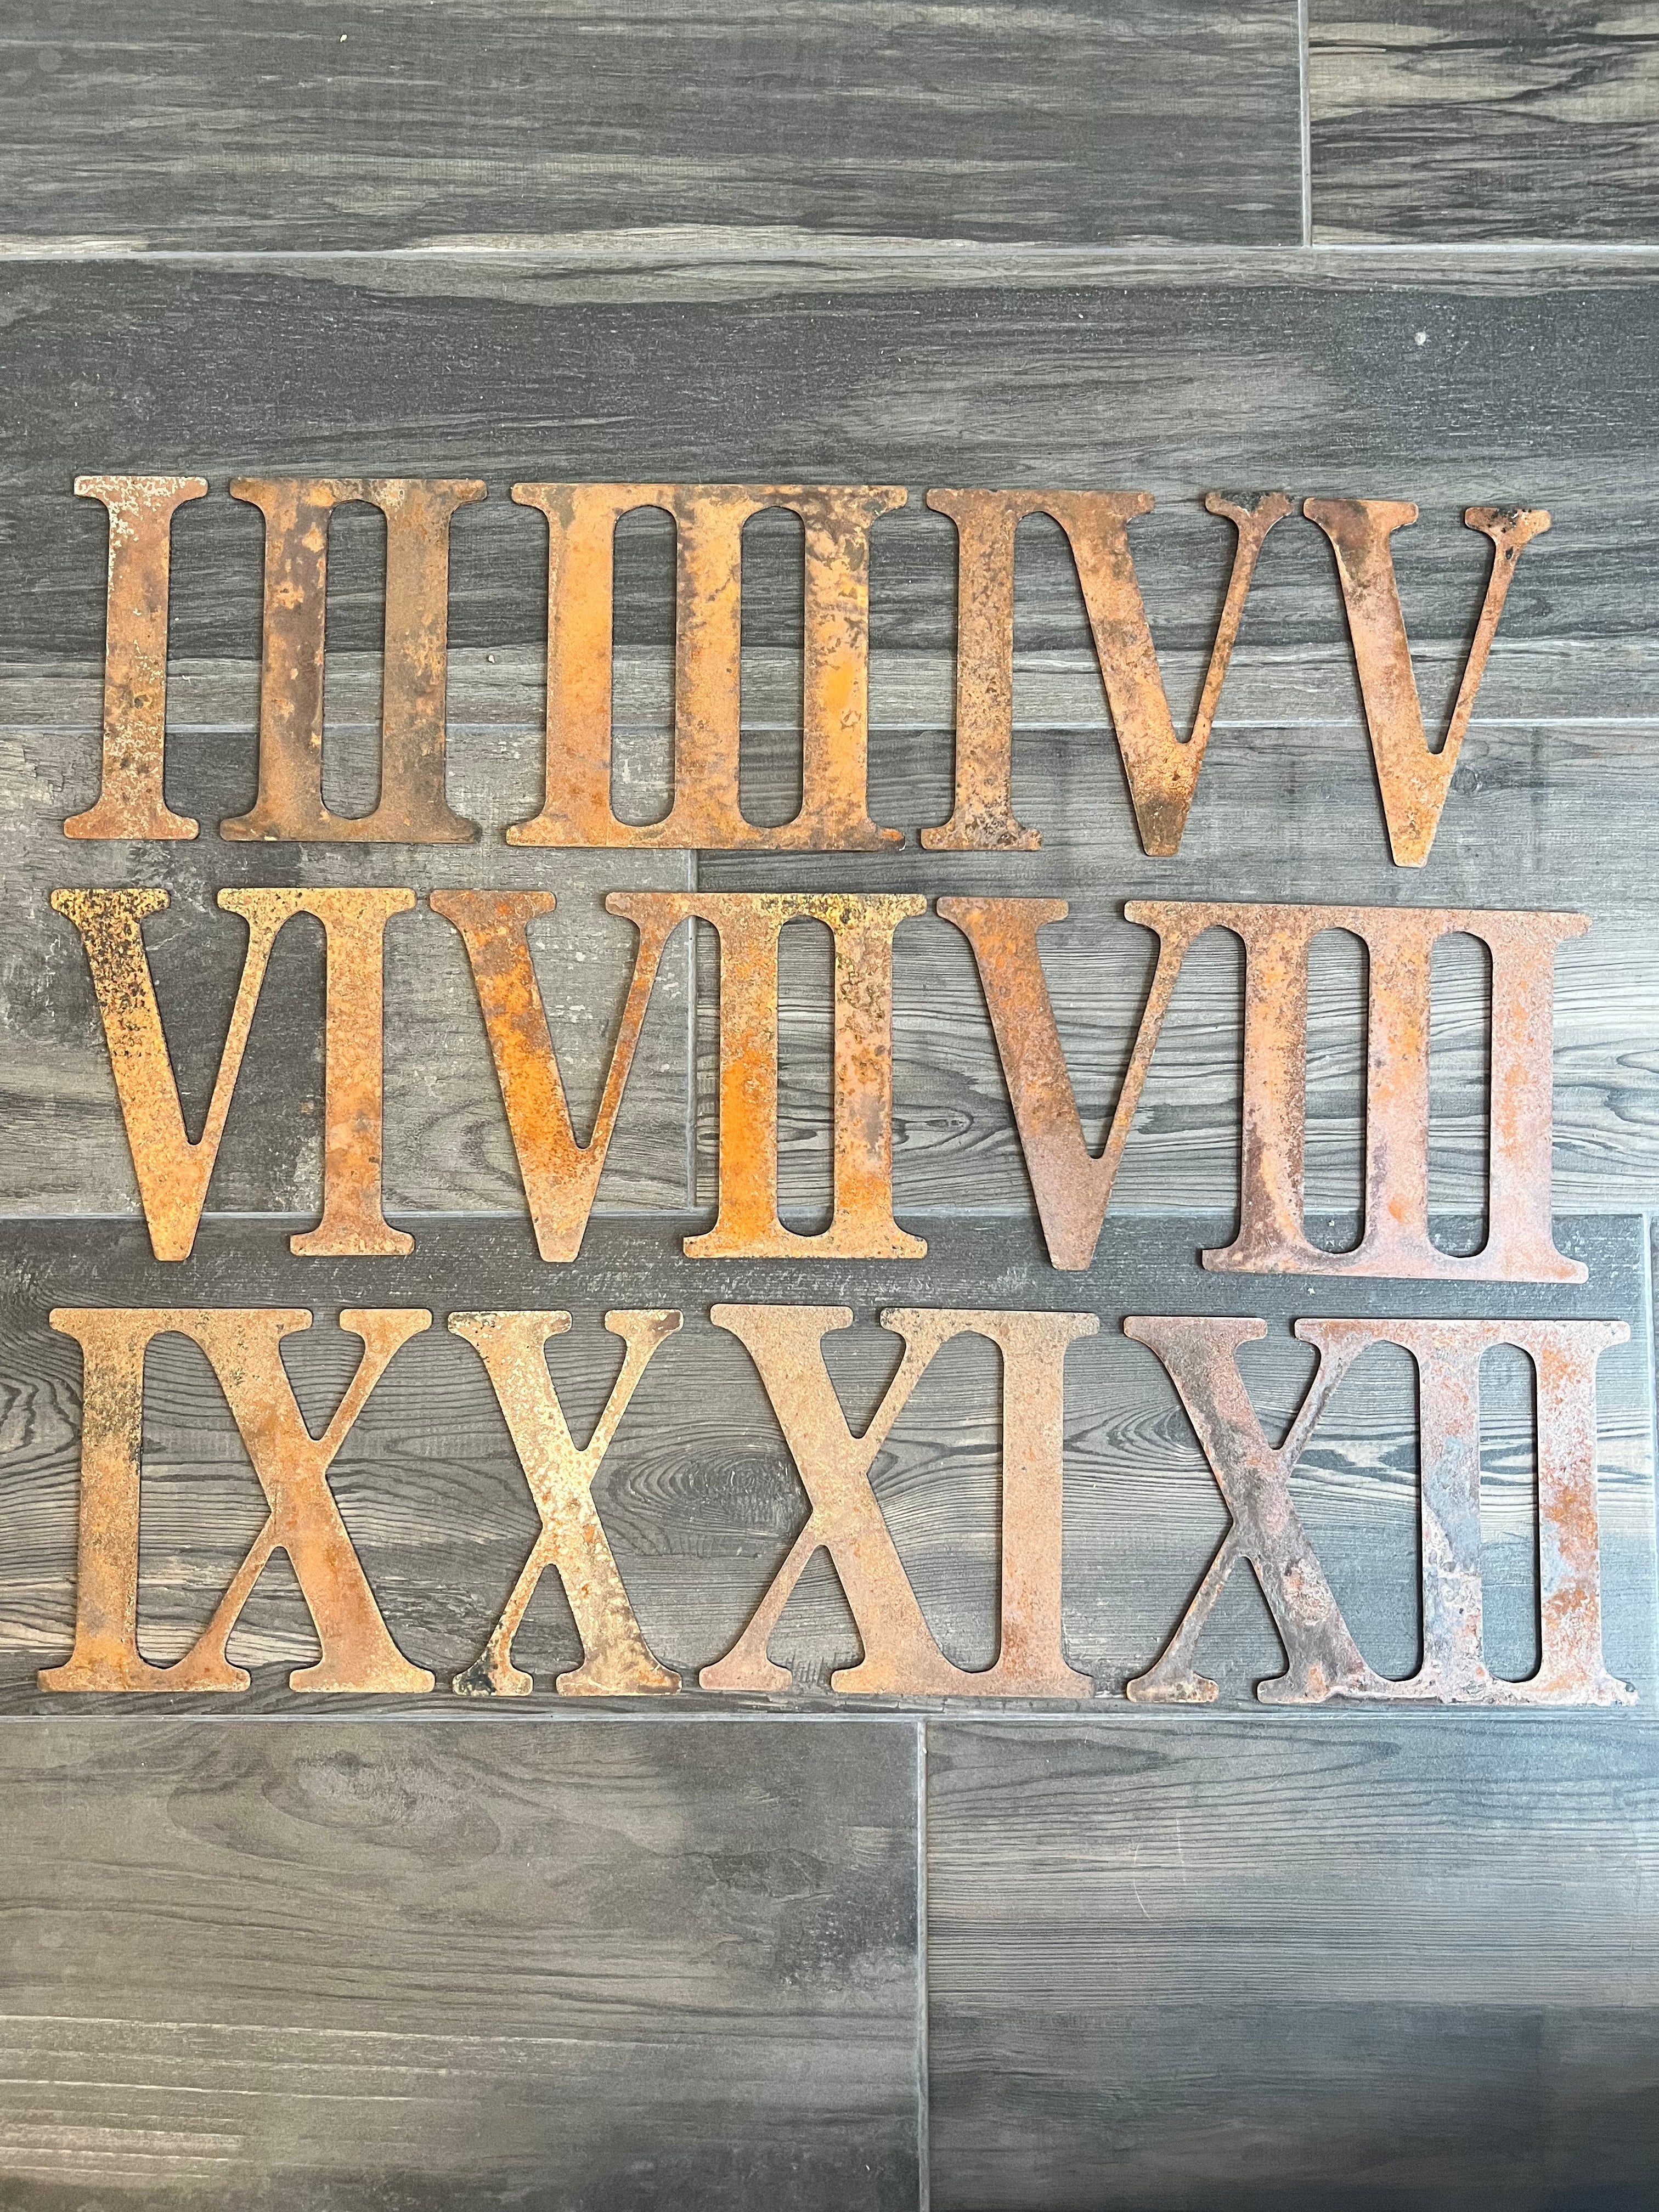 8 Inch Metal Roman Numerals - Rusty or Natural Steel Finish